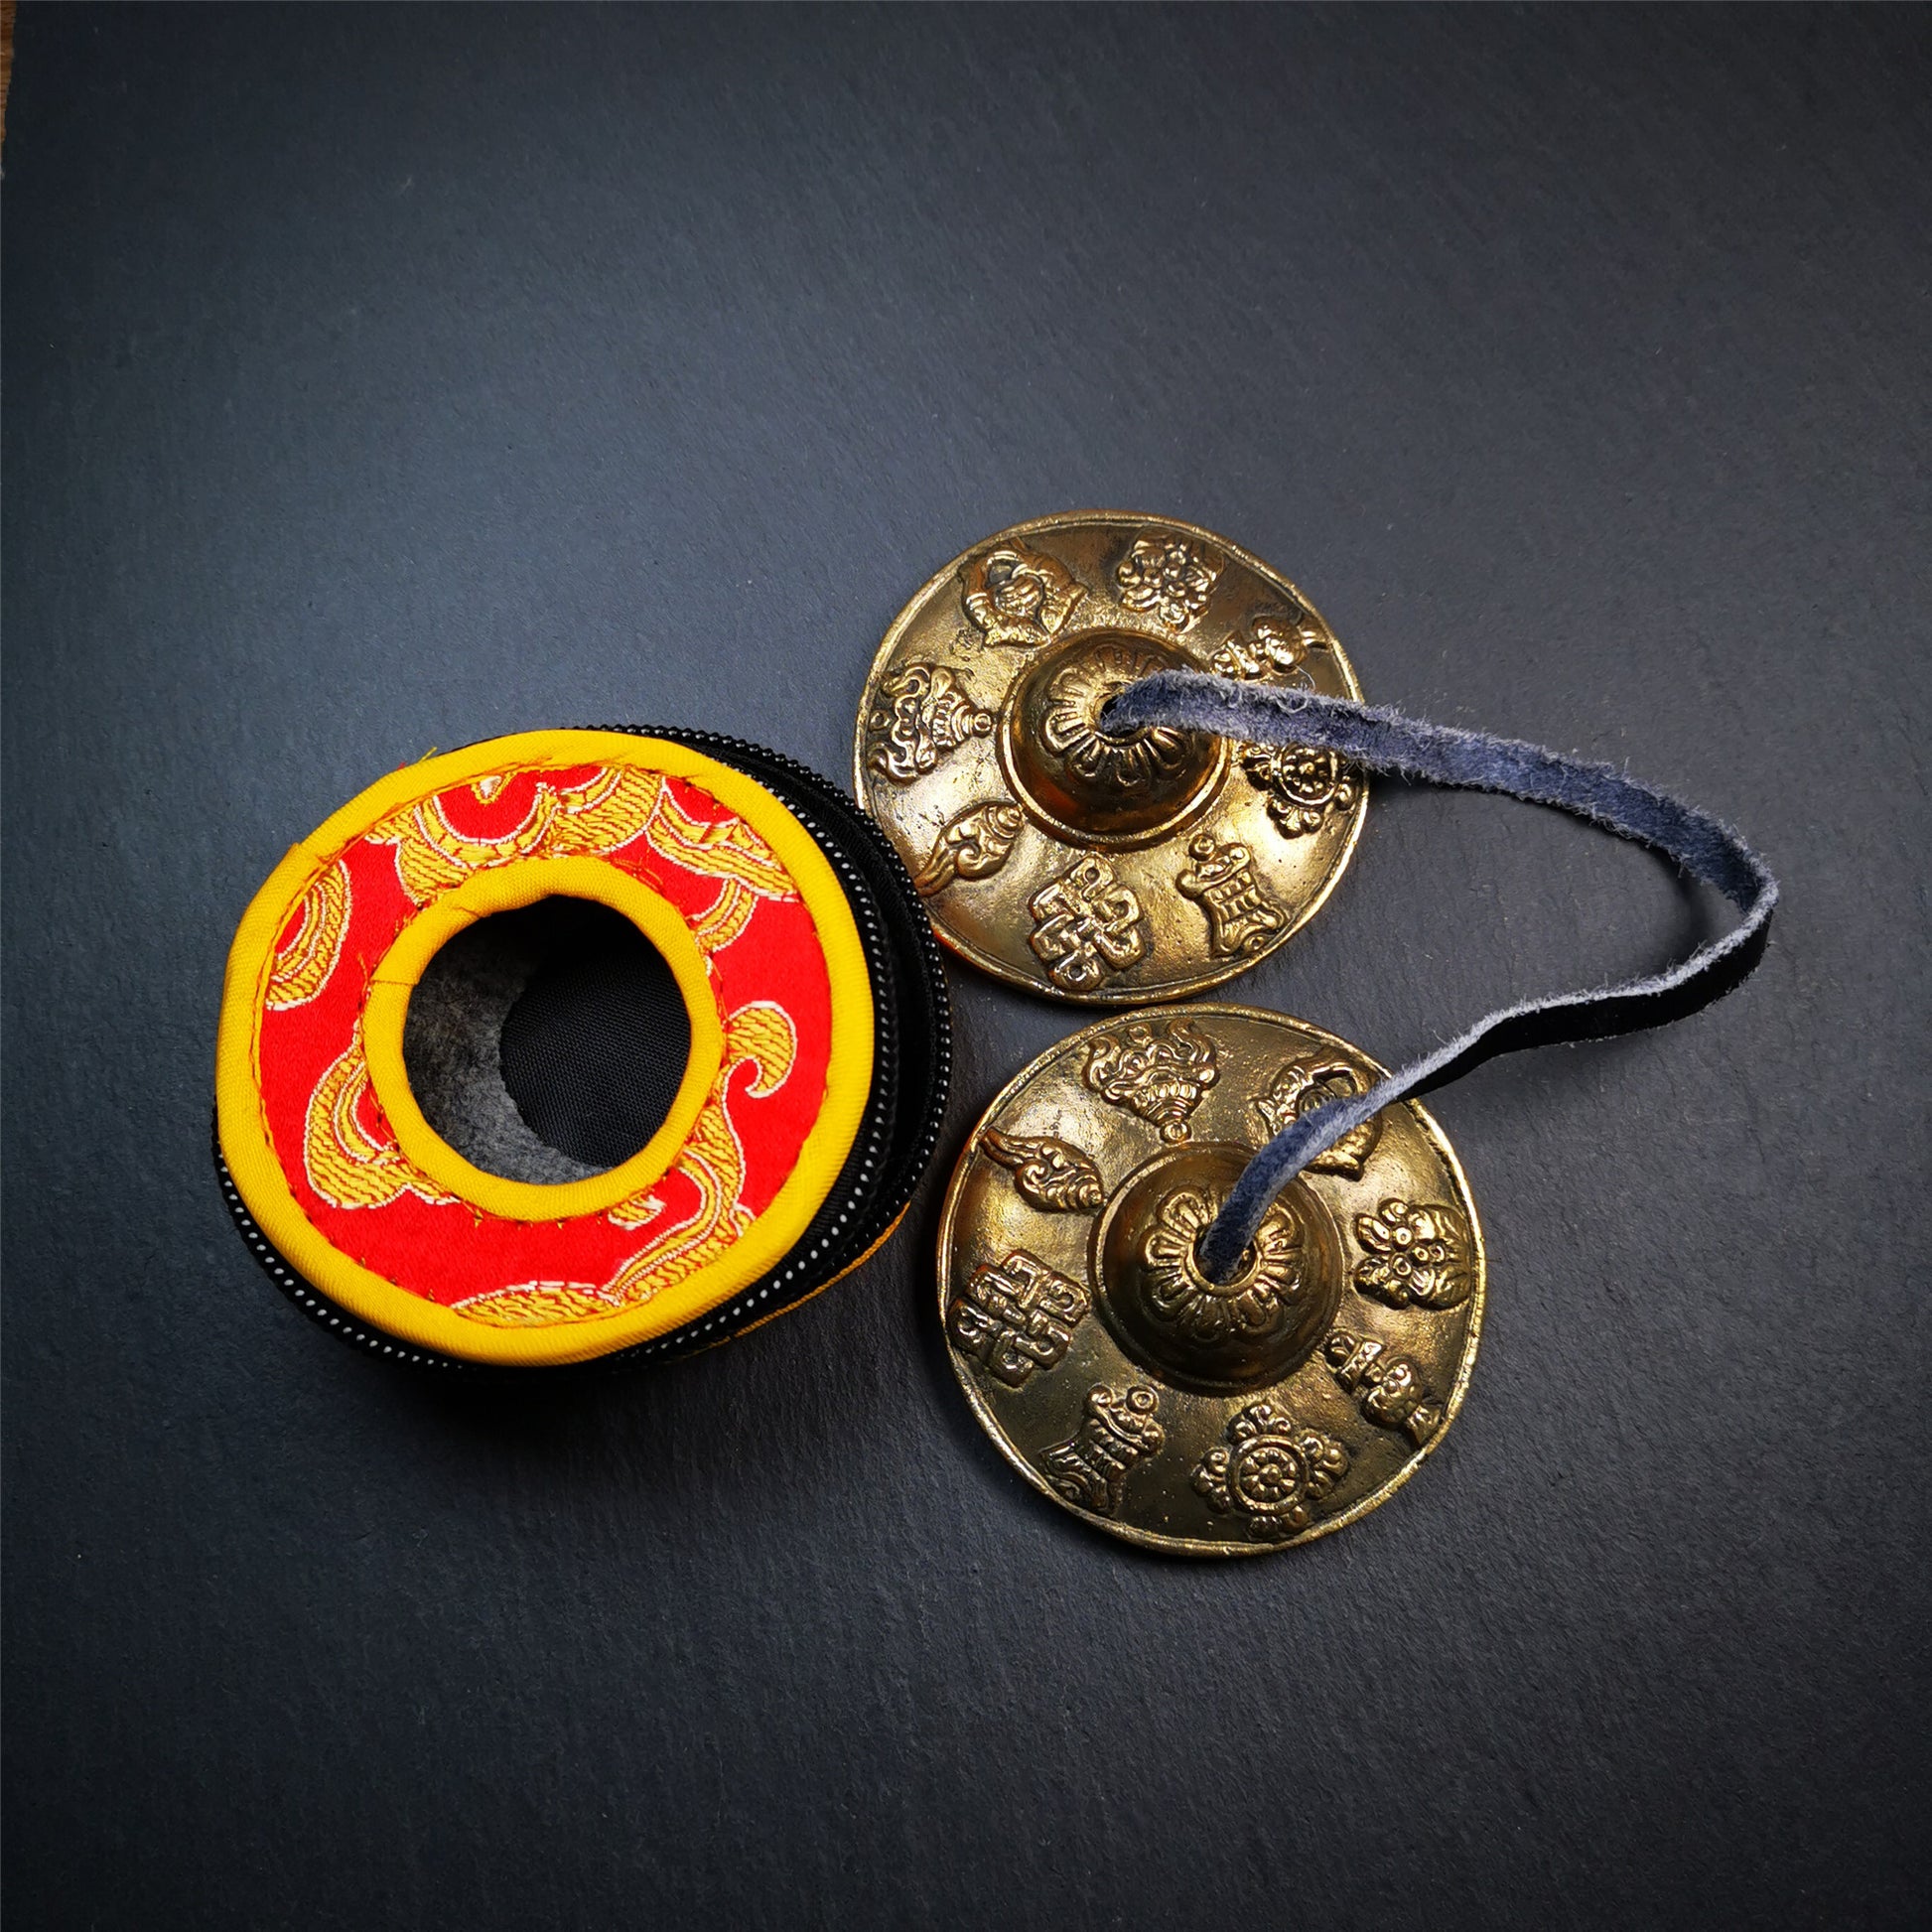 This tingsha bell set was handmade in Nepal,using traditional techniques and materials. It was made of brass,carved astamangal pattern,6.5cm diameter,with pure, clear and resonant,good for meditation. Come with tingsha case.